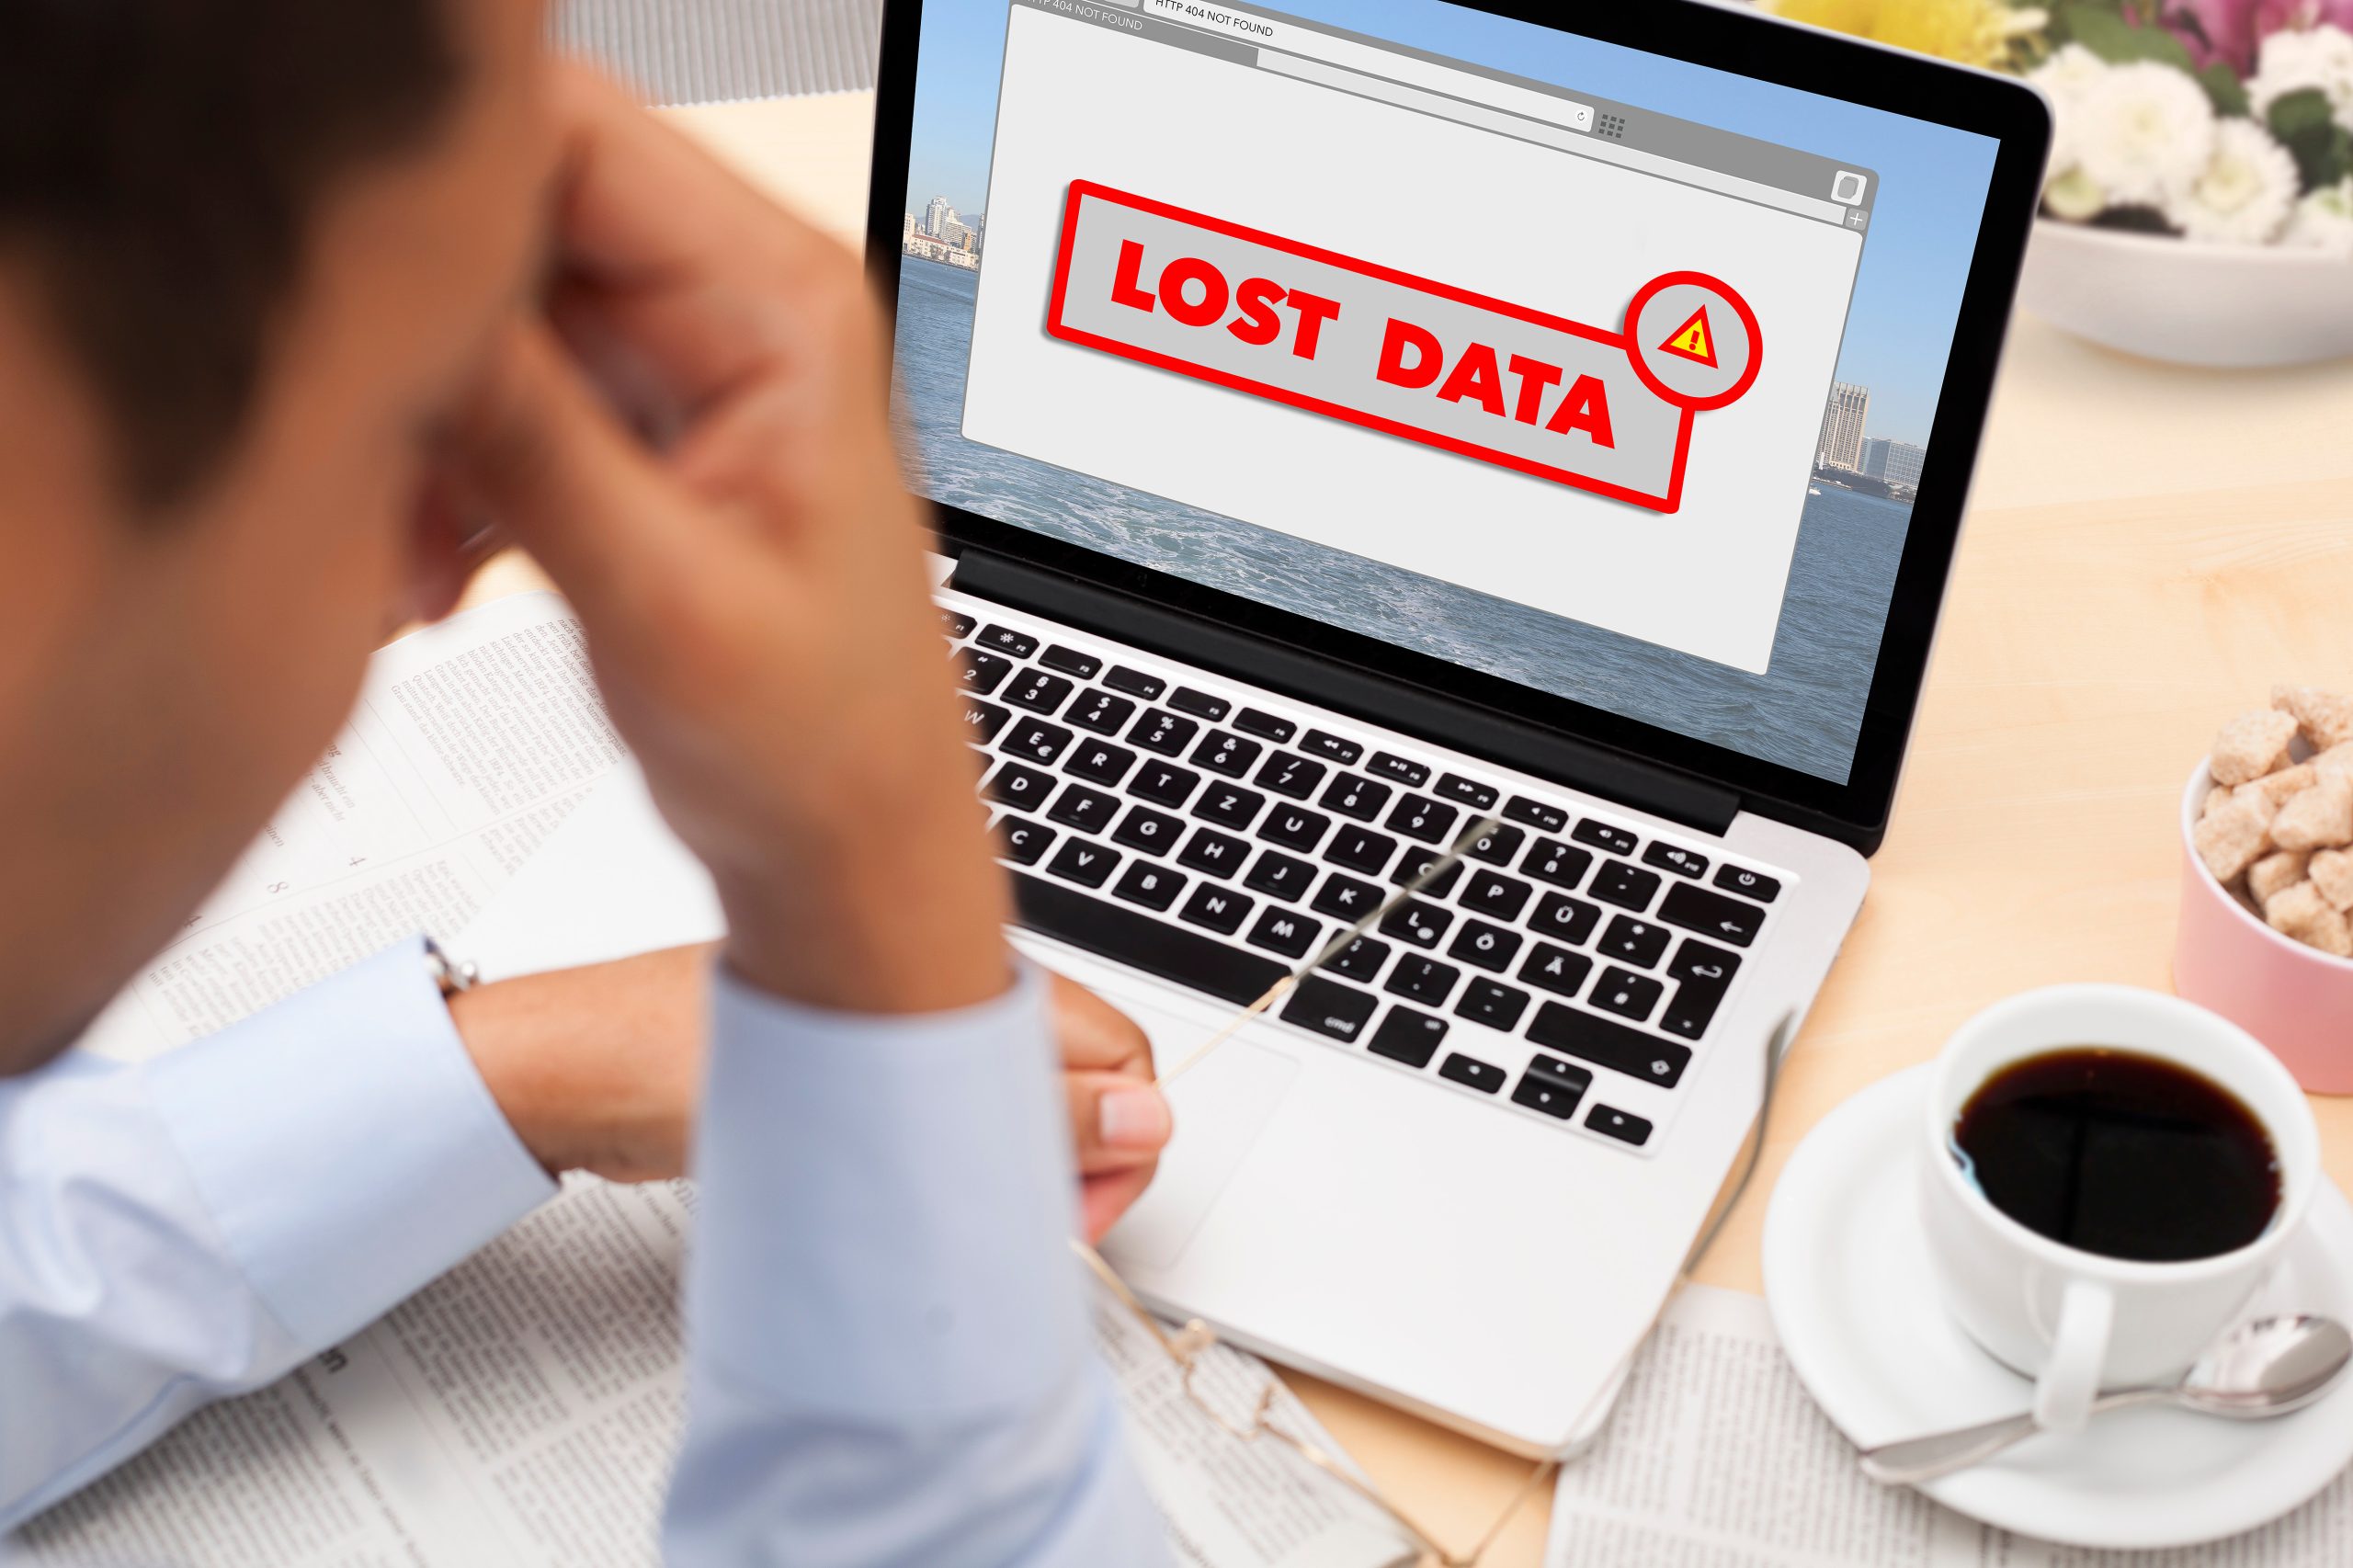 Lost Data or lost productivity due to lost data
